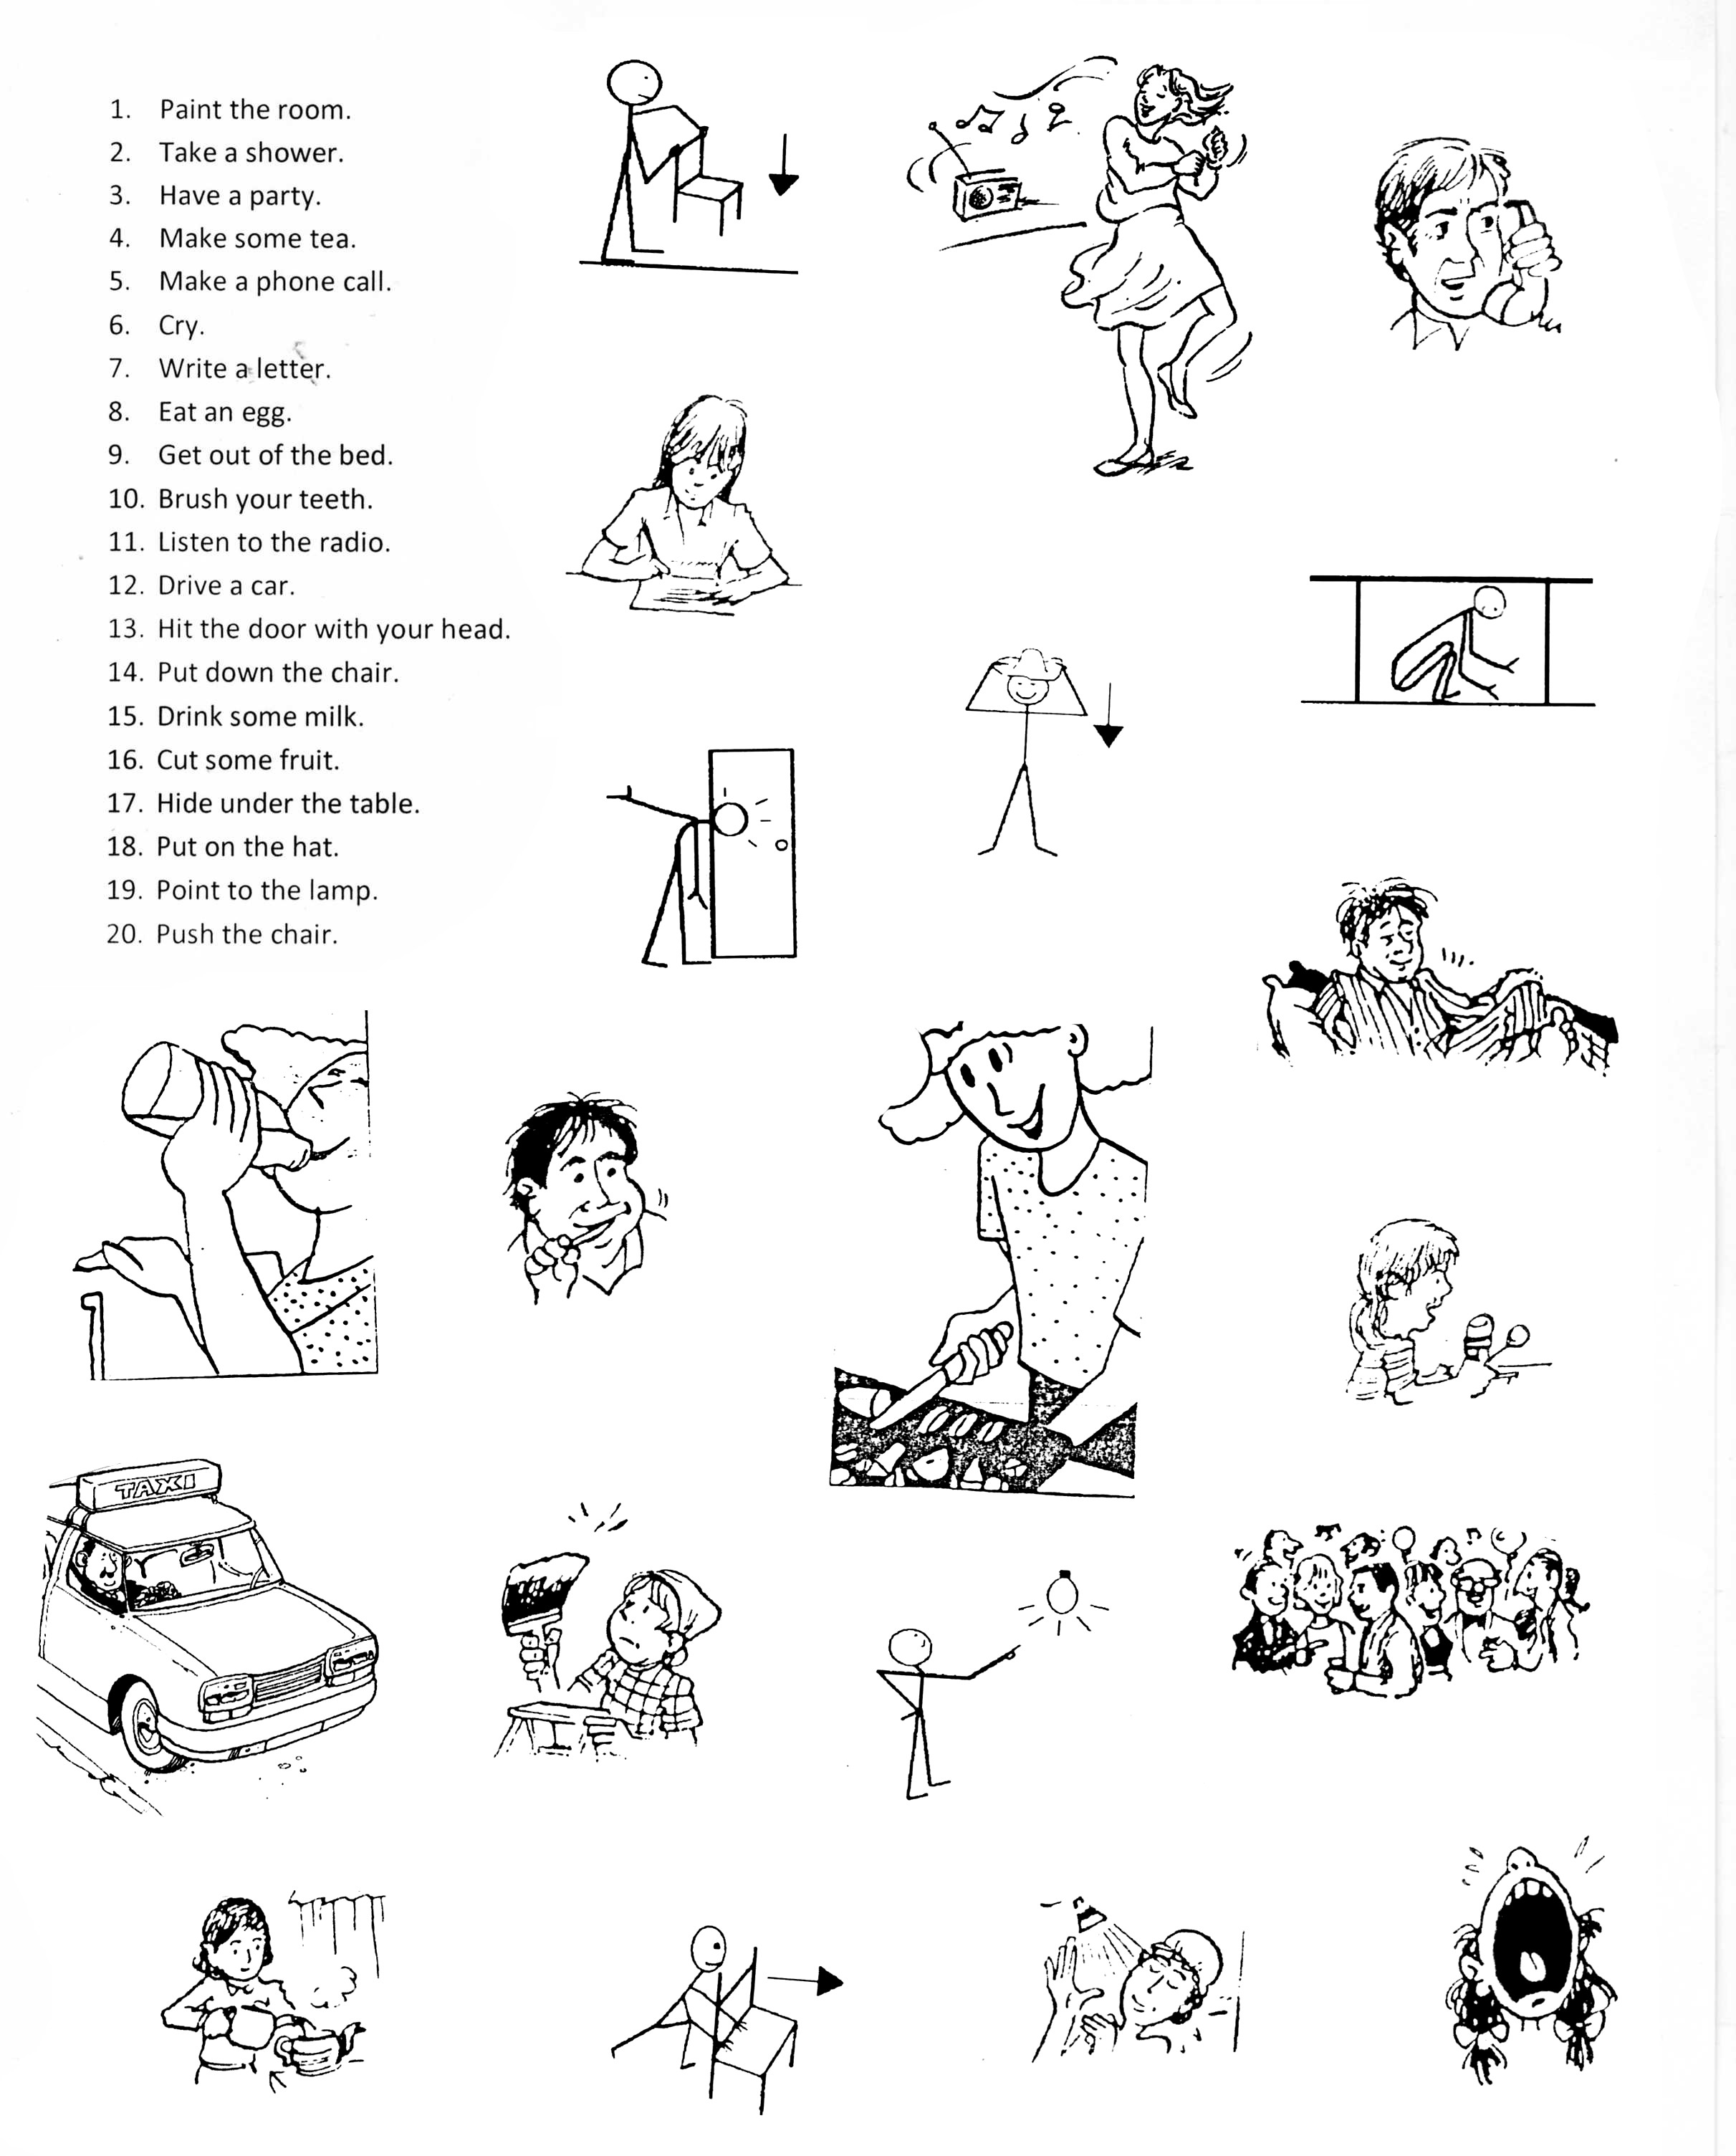 19-best-images-of-verb-worksheets-for-beginners-verb-be-worksheets-esl-action-verbs-worksheet